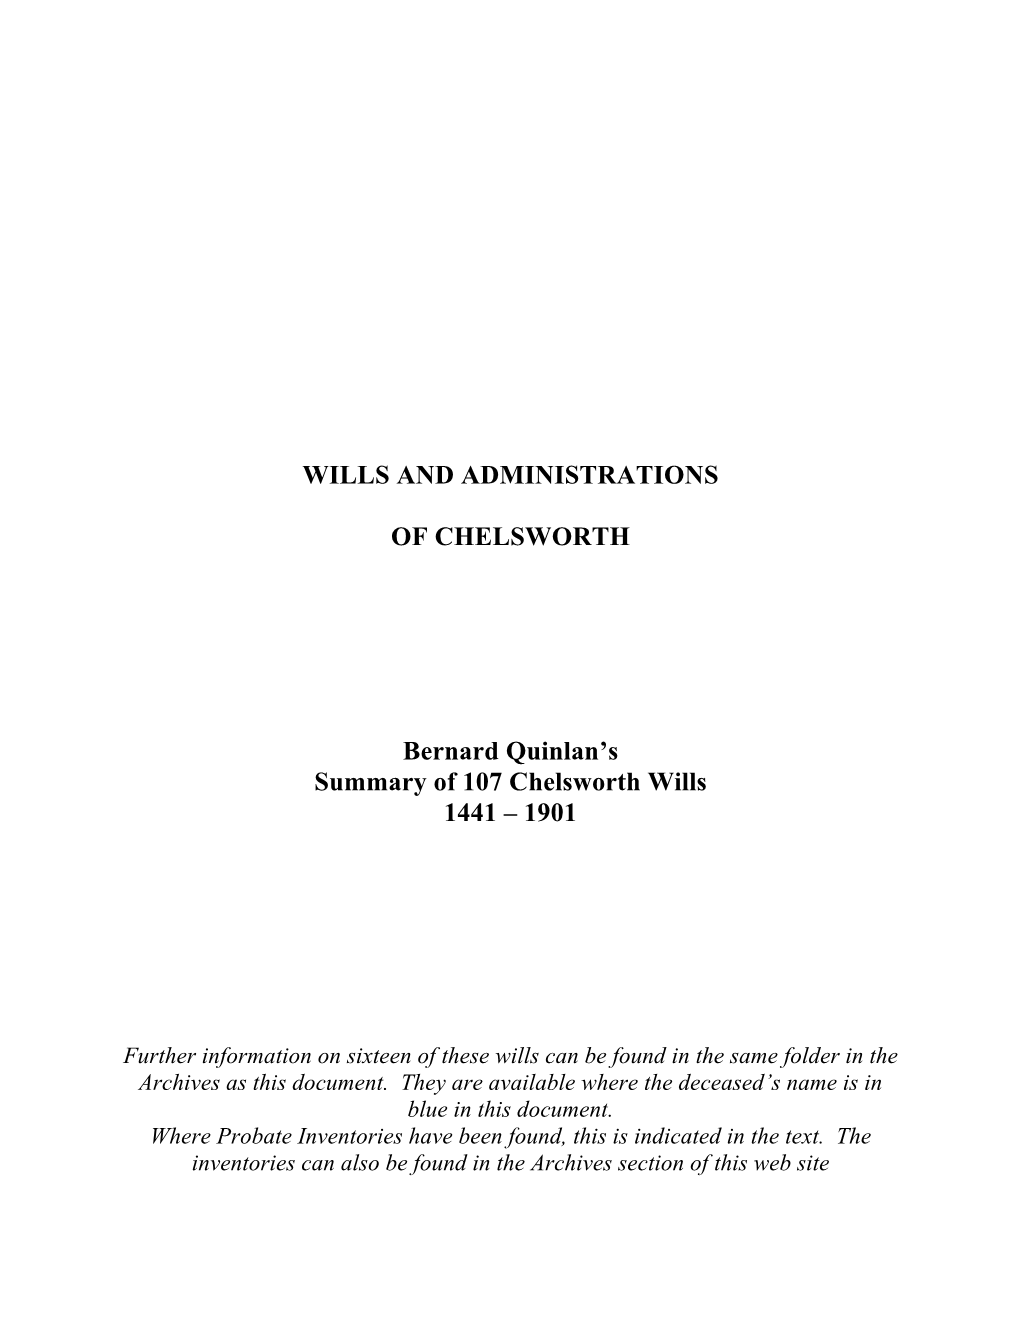 WILLS and ADMINISTRATIONS of CHELSWORTH Bernard Quinlan's Summary of 107 Chelsworth Wills 1441